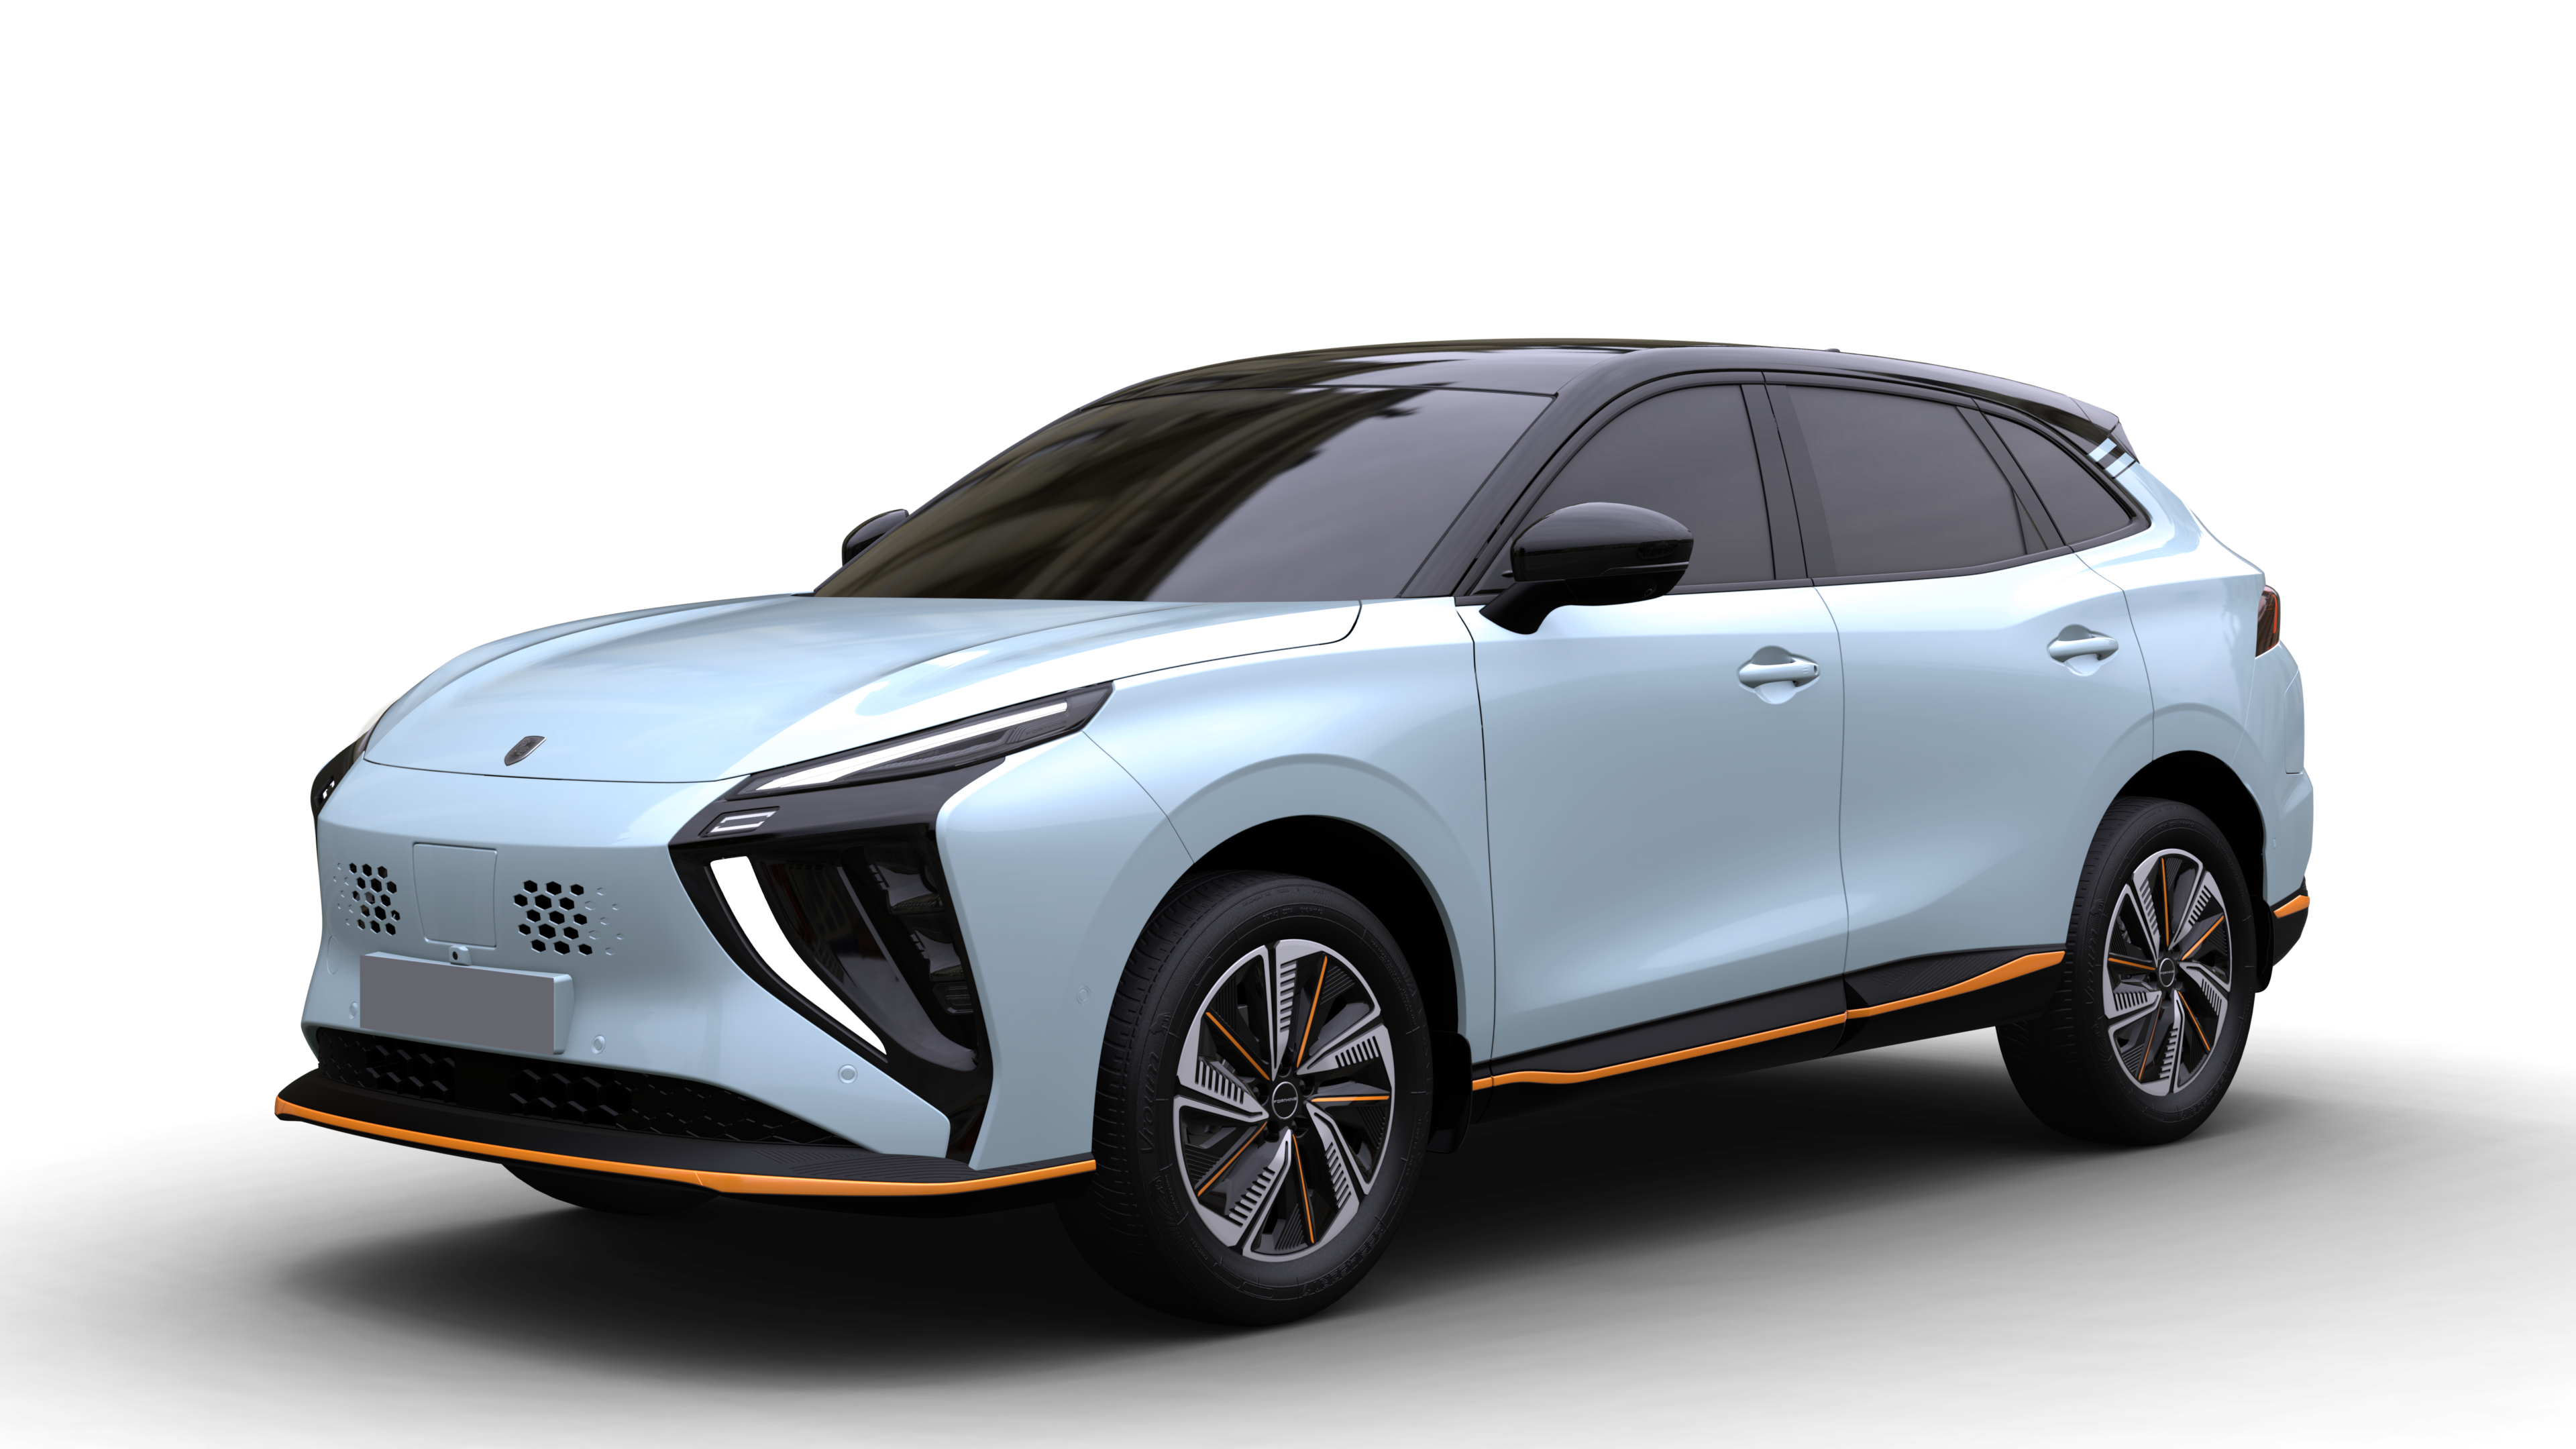 Forthing Auto Electric SUV រថយន្តថ្មី។